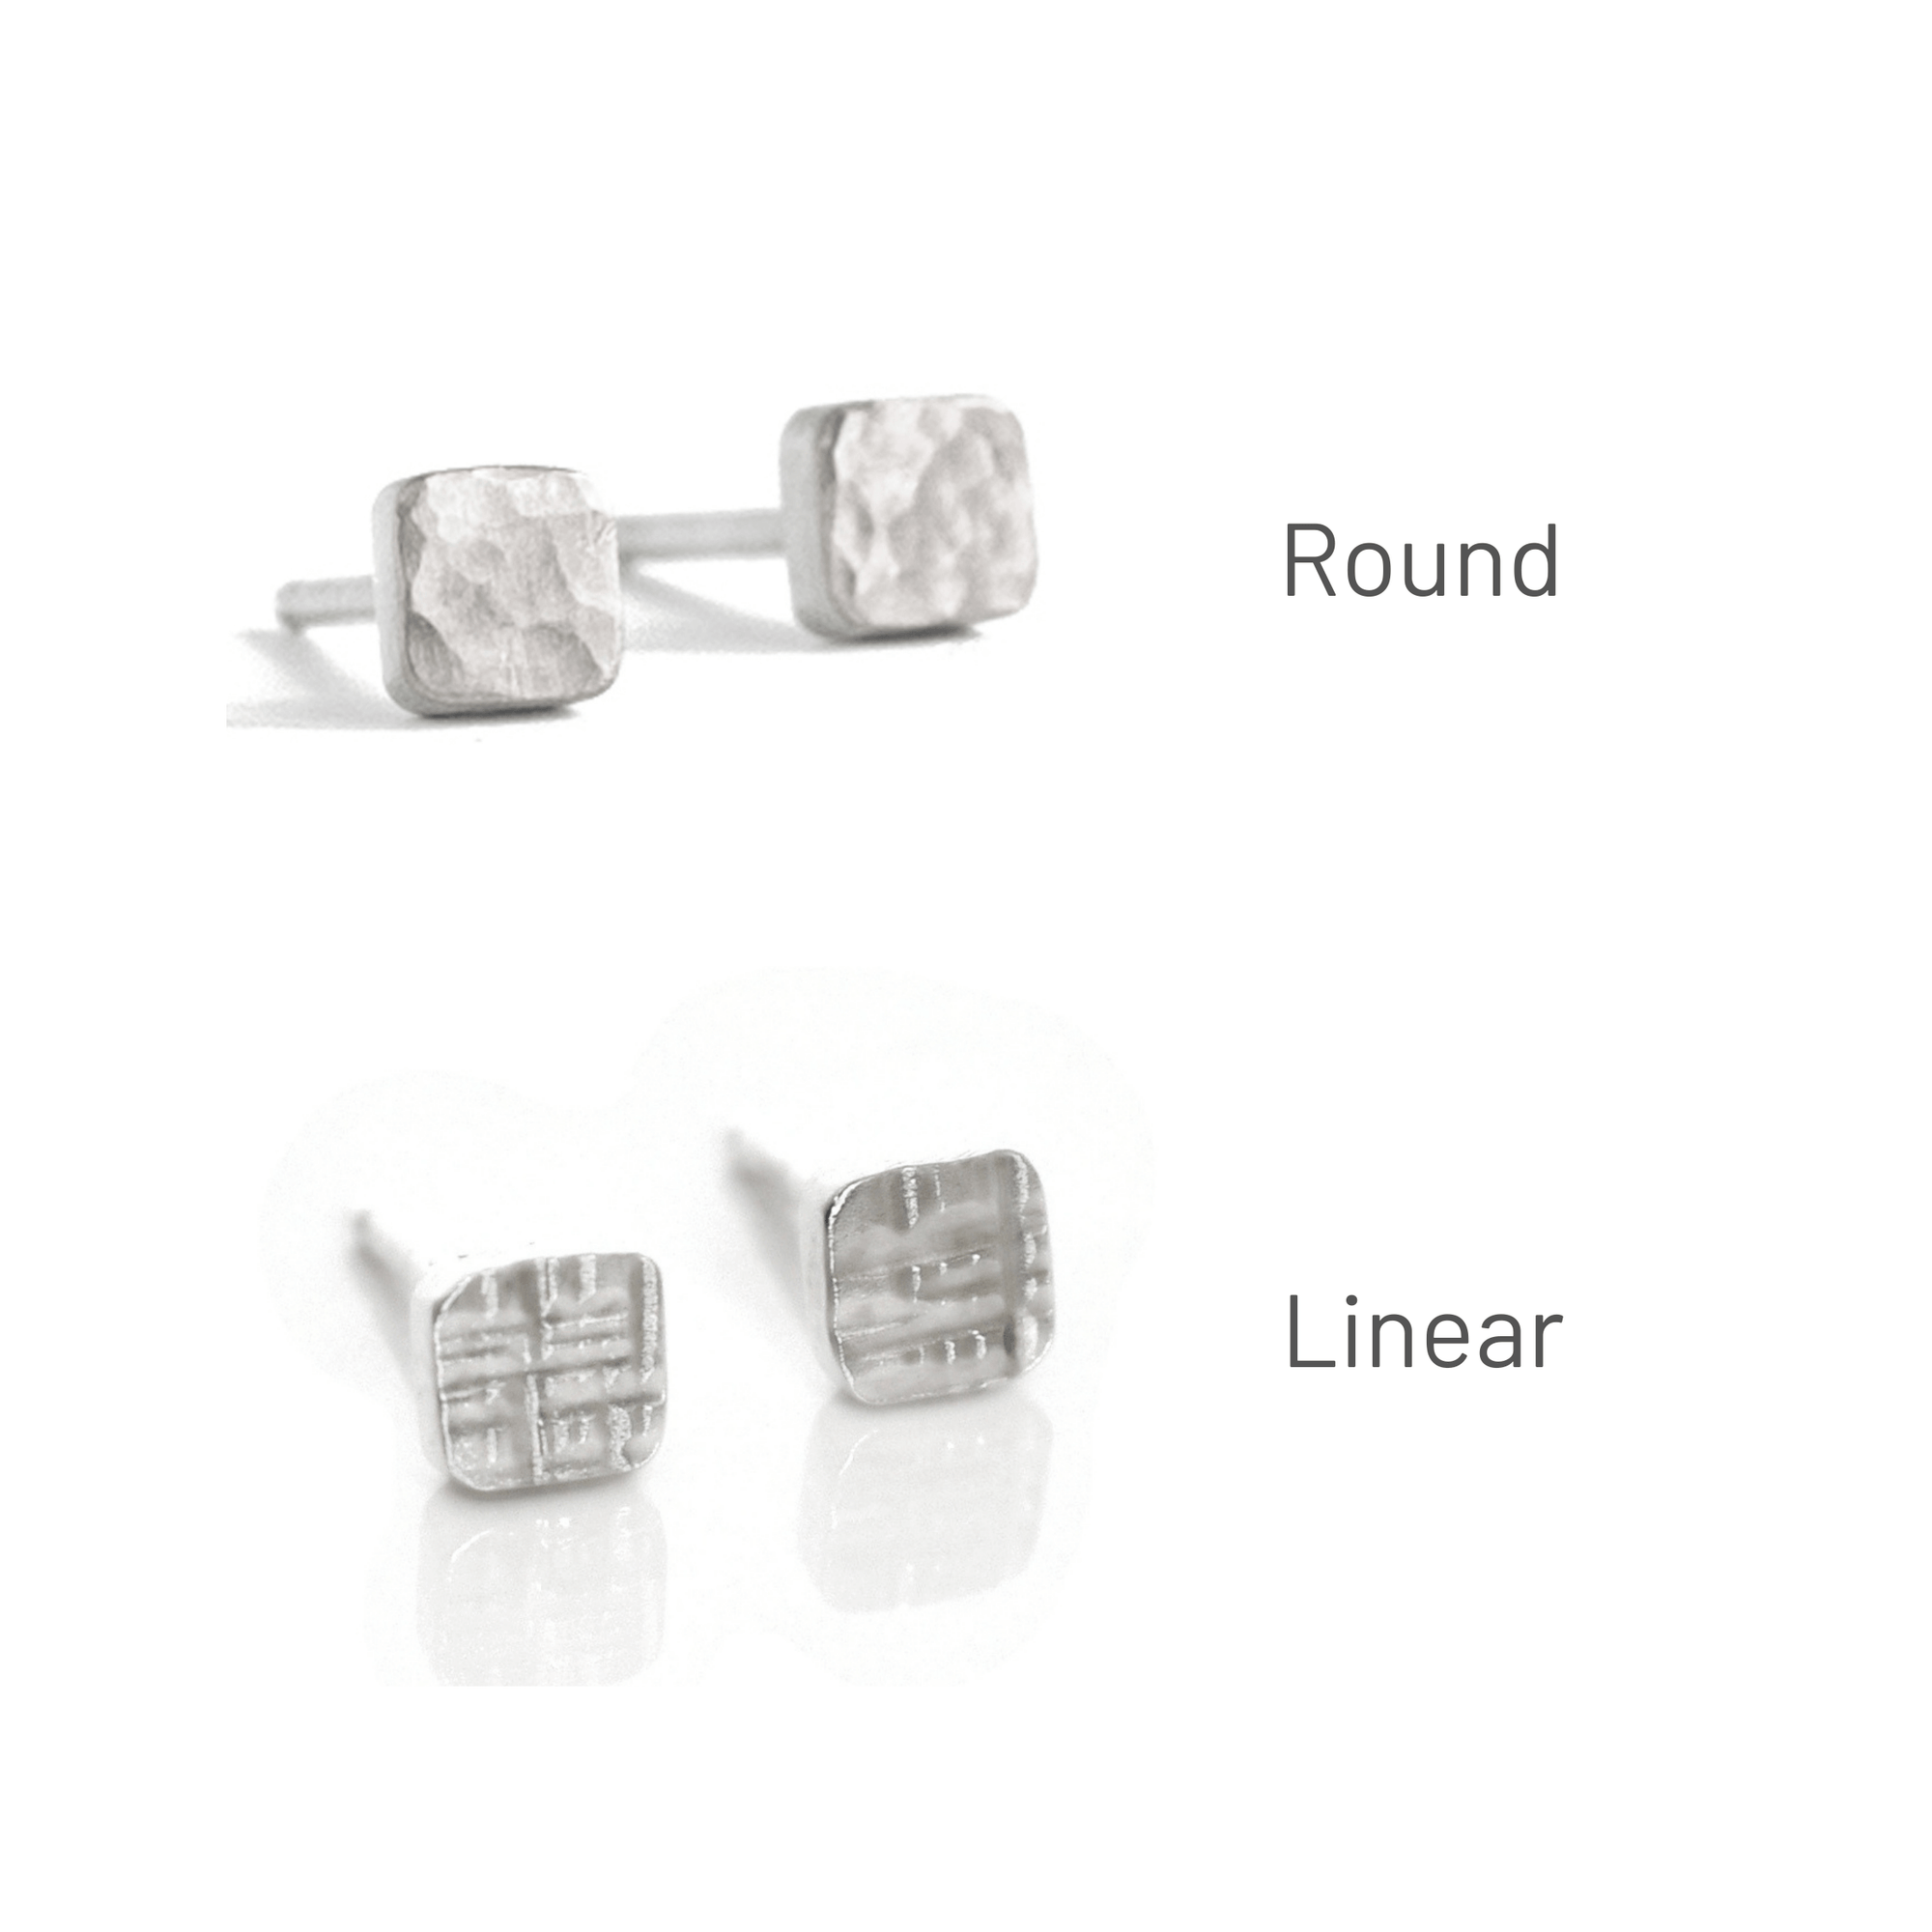 Sterling silver square studs in round and linear hammered finish. Handmade by EC Design Jewelry in Minneapolis, MN using recycled metal.